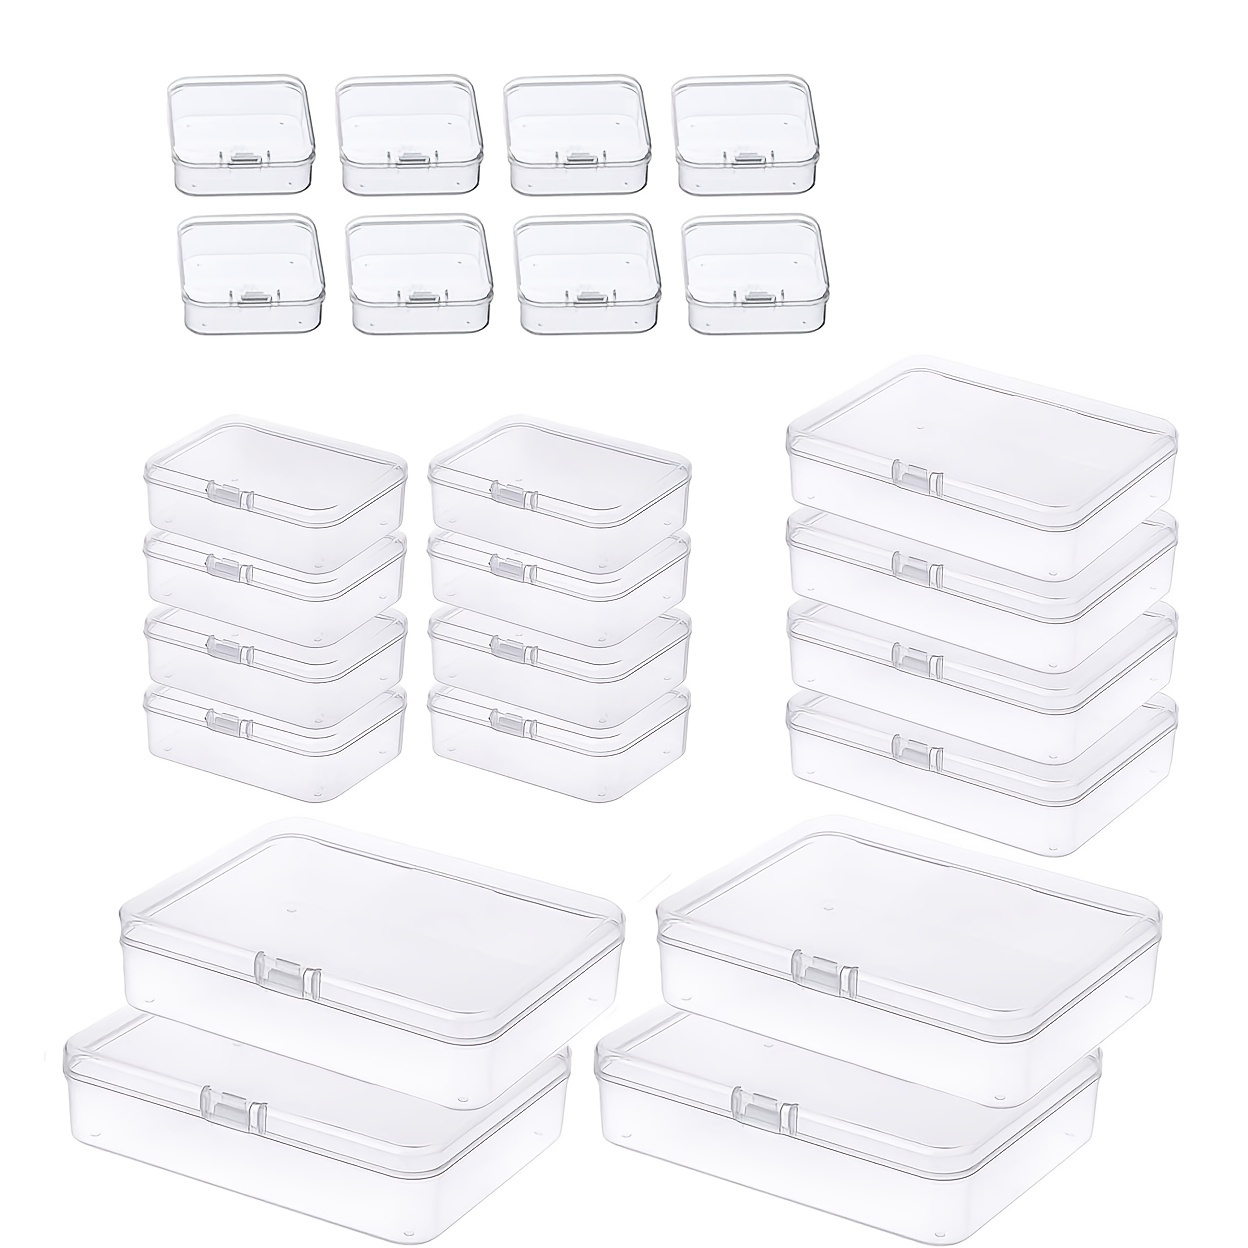 10pcs Mini Boxes Rectangle Transparent Plastic Jewelry Storage Case  Container Packaging Box For Earrings Rings Beads Collecting Small Items